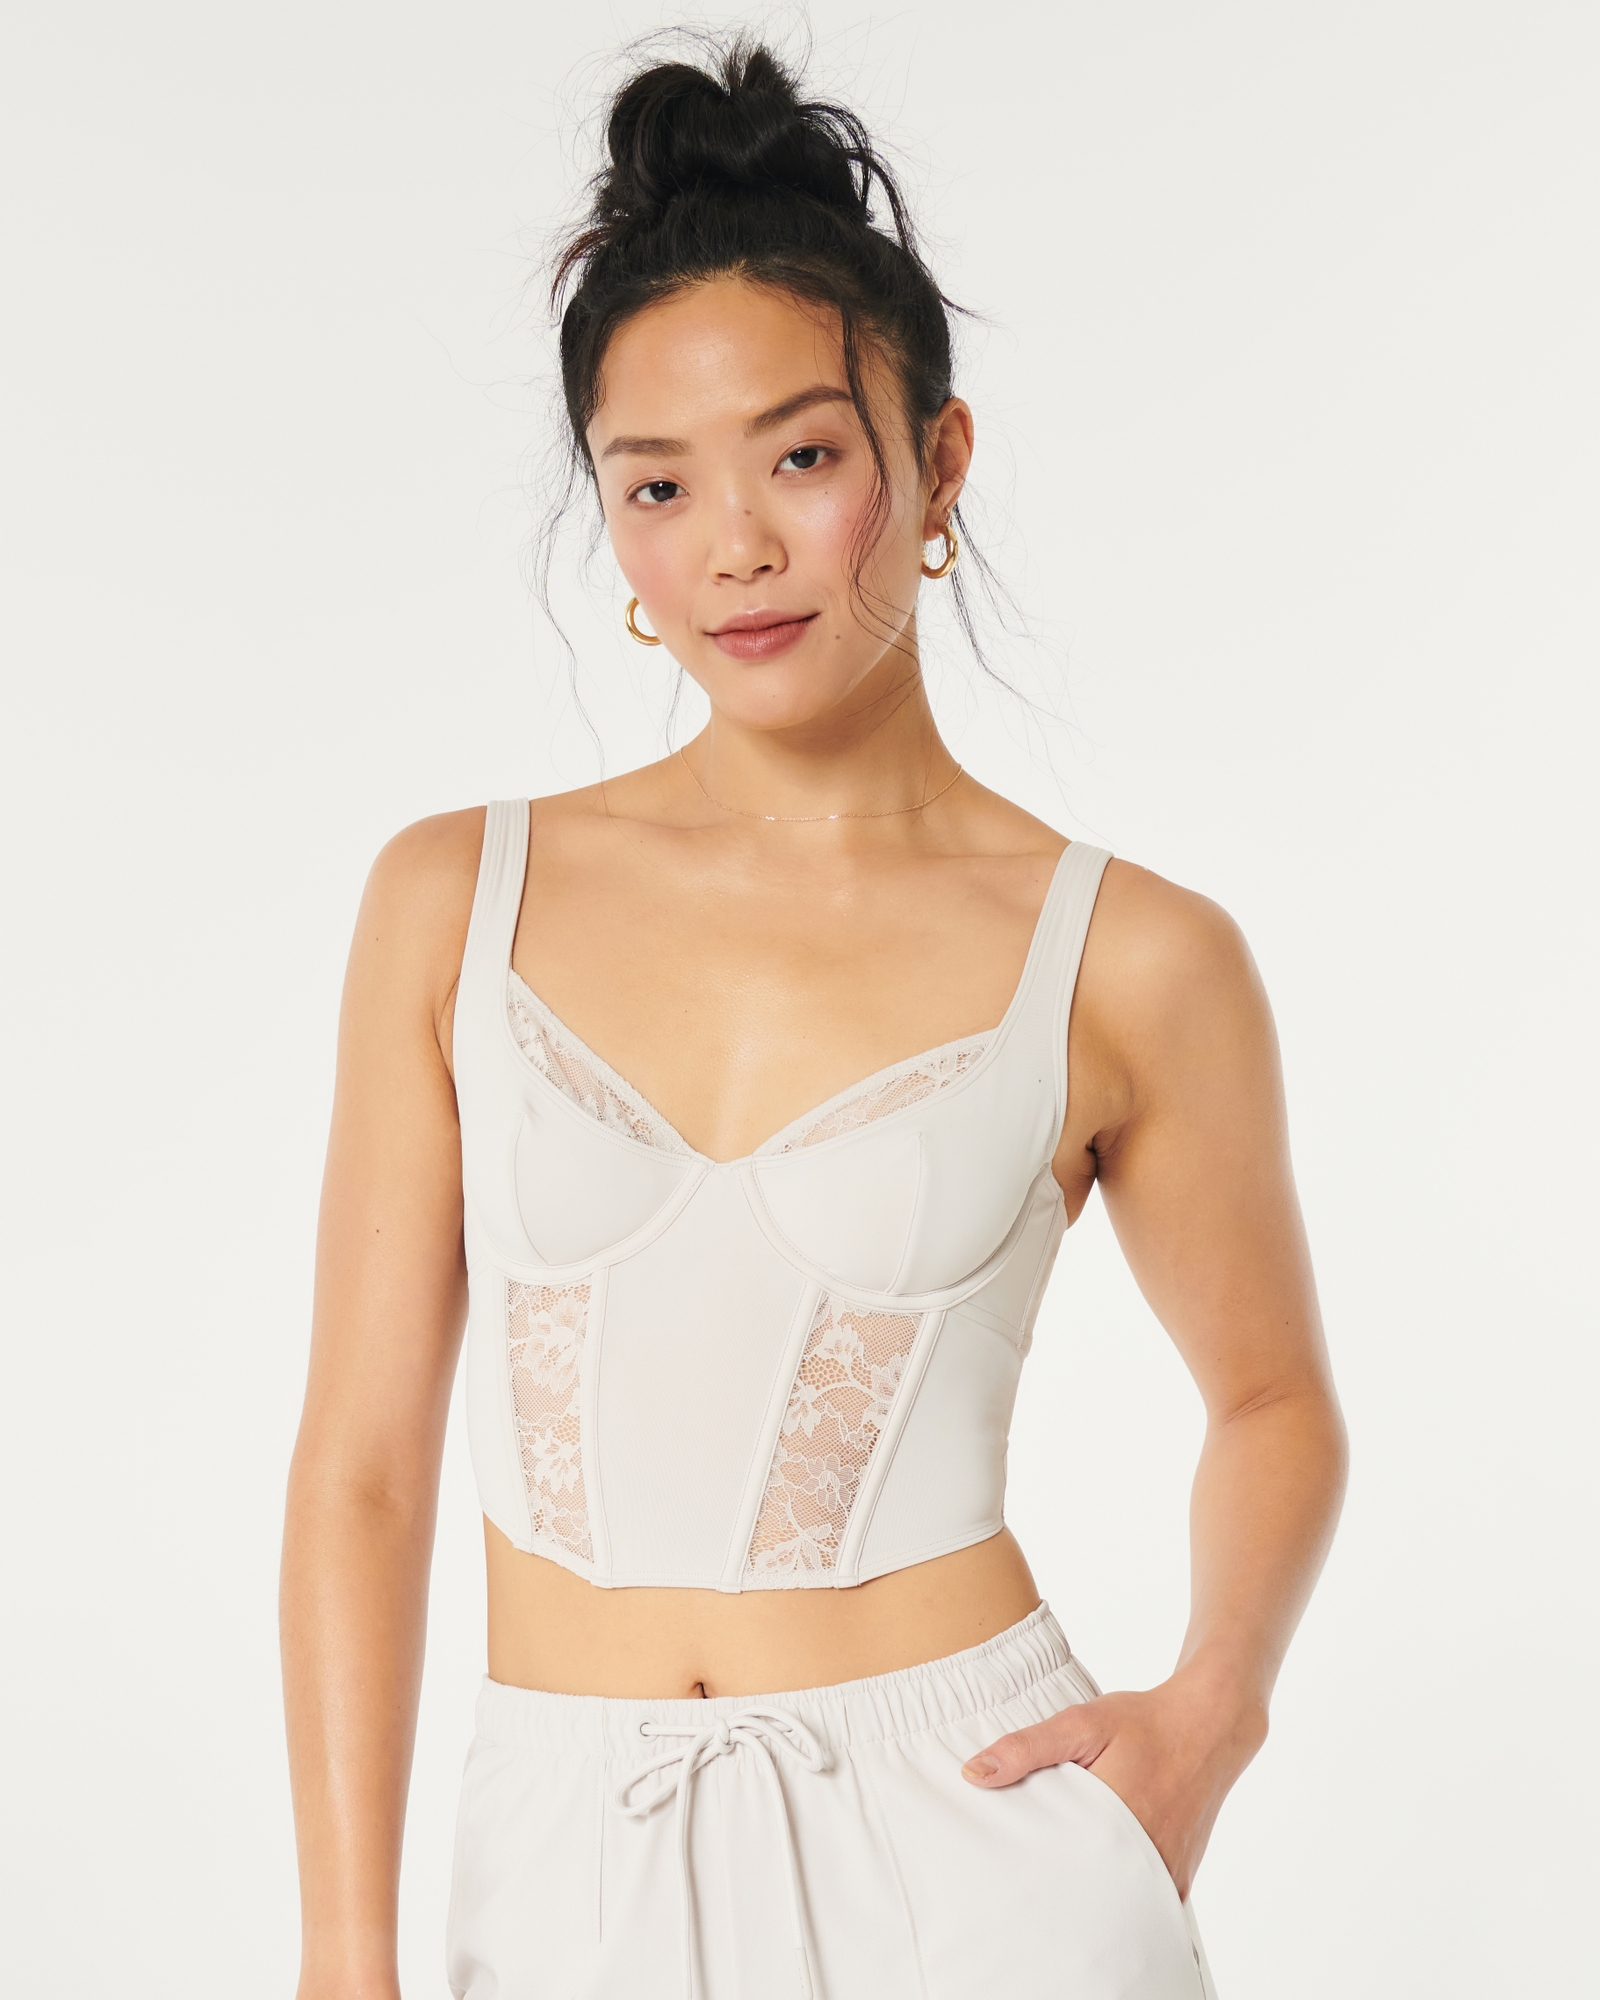 Hollister Hollister Gilly Hicks Micro & Lace Bustier 34.95